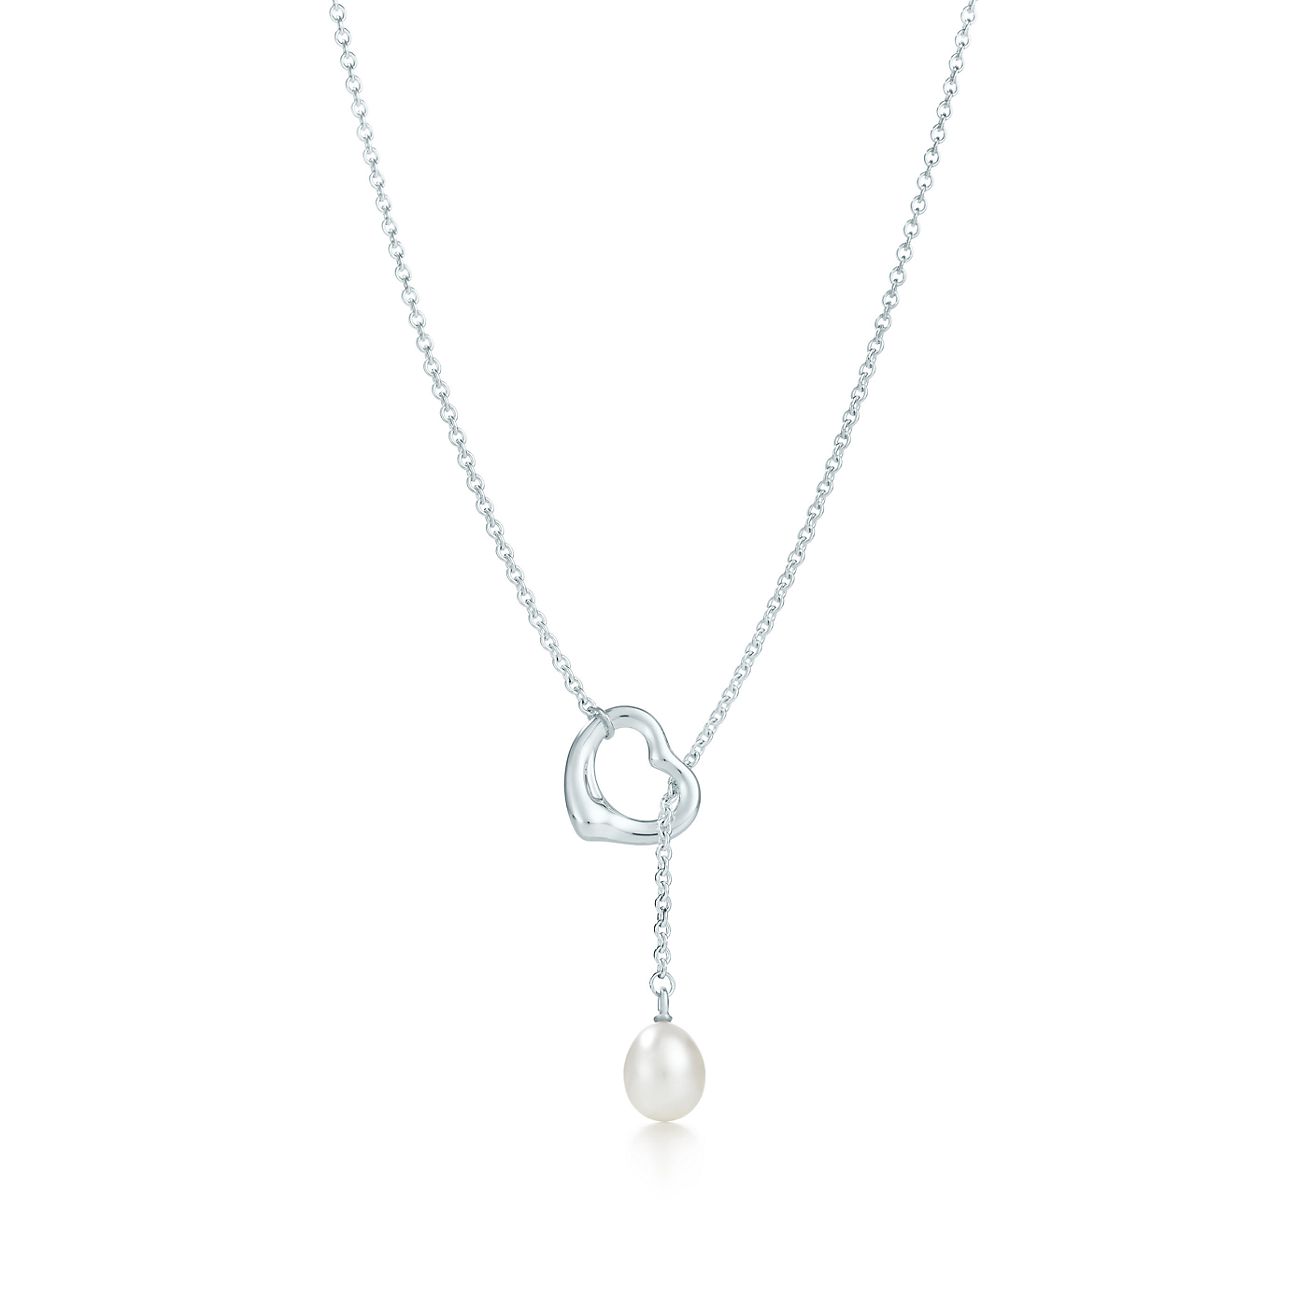 Elsa Peretti Open Heart Lariat Necklace in Silver with Pearls, 9-9.5 mm